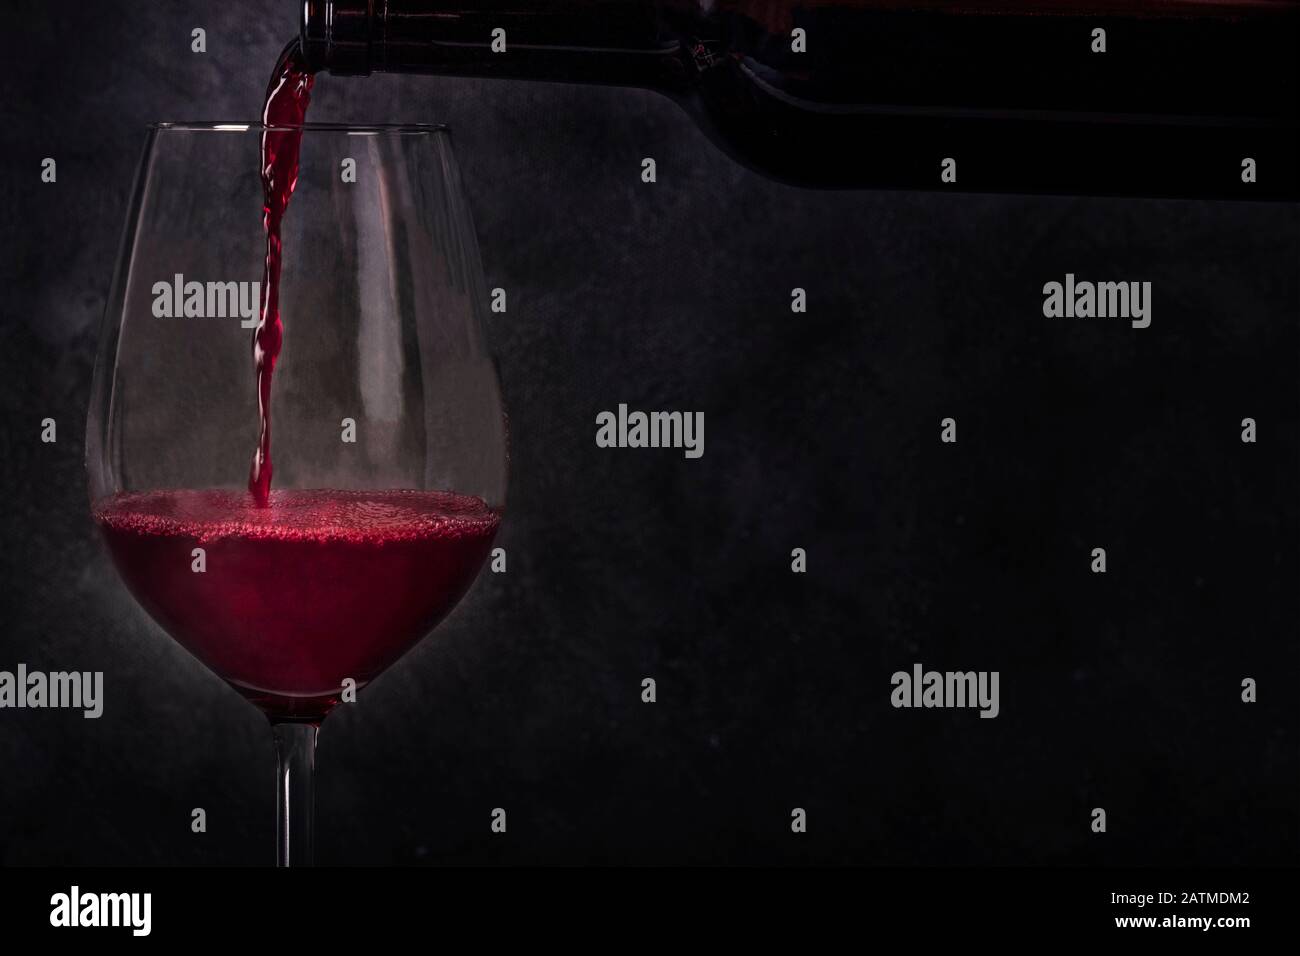 Pouring wine into a glass from a bottle, side view on a black background with a place for text Stock Photo